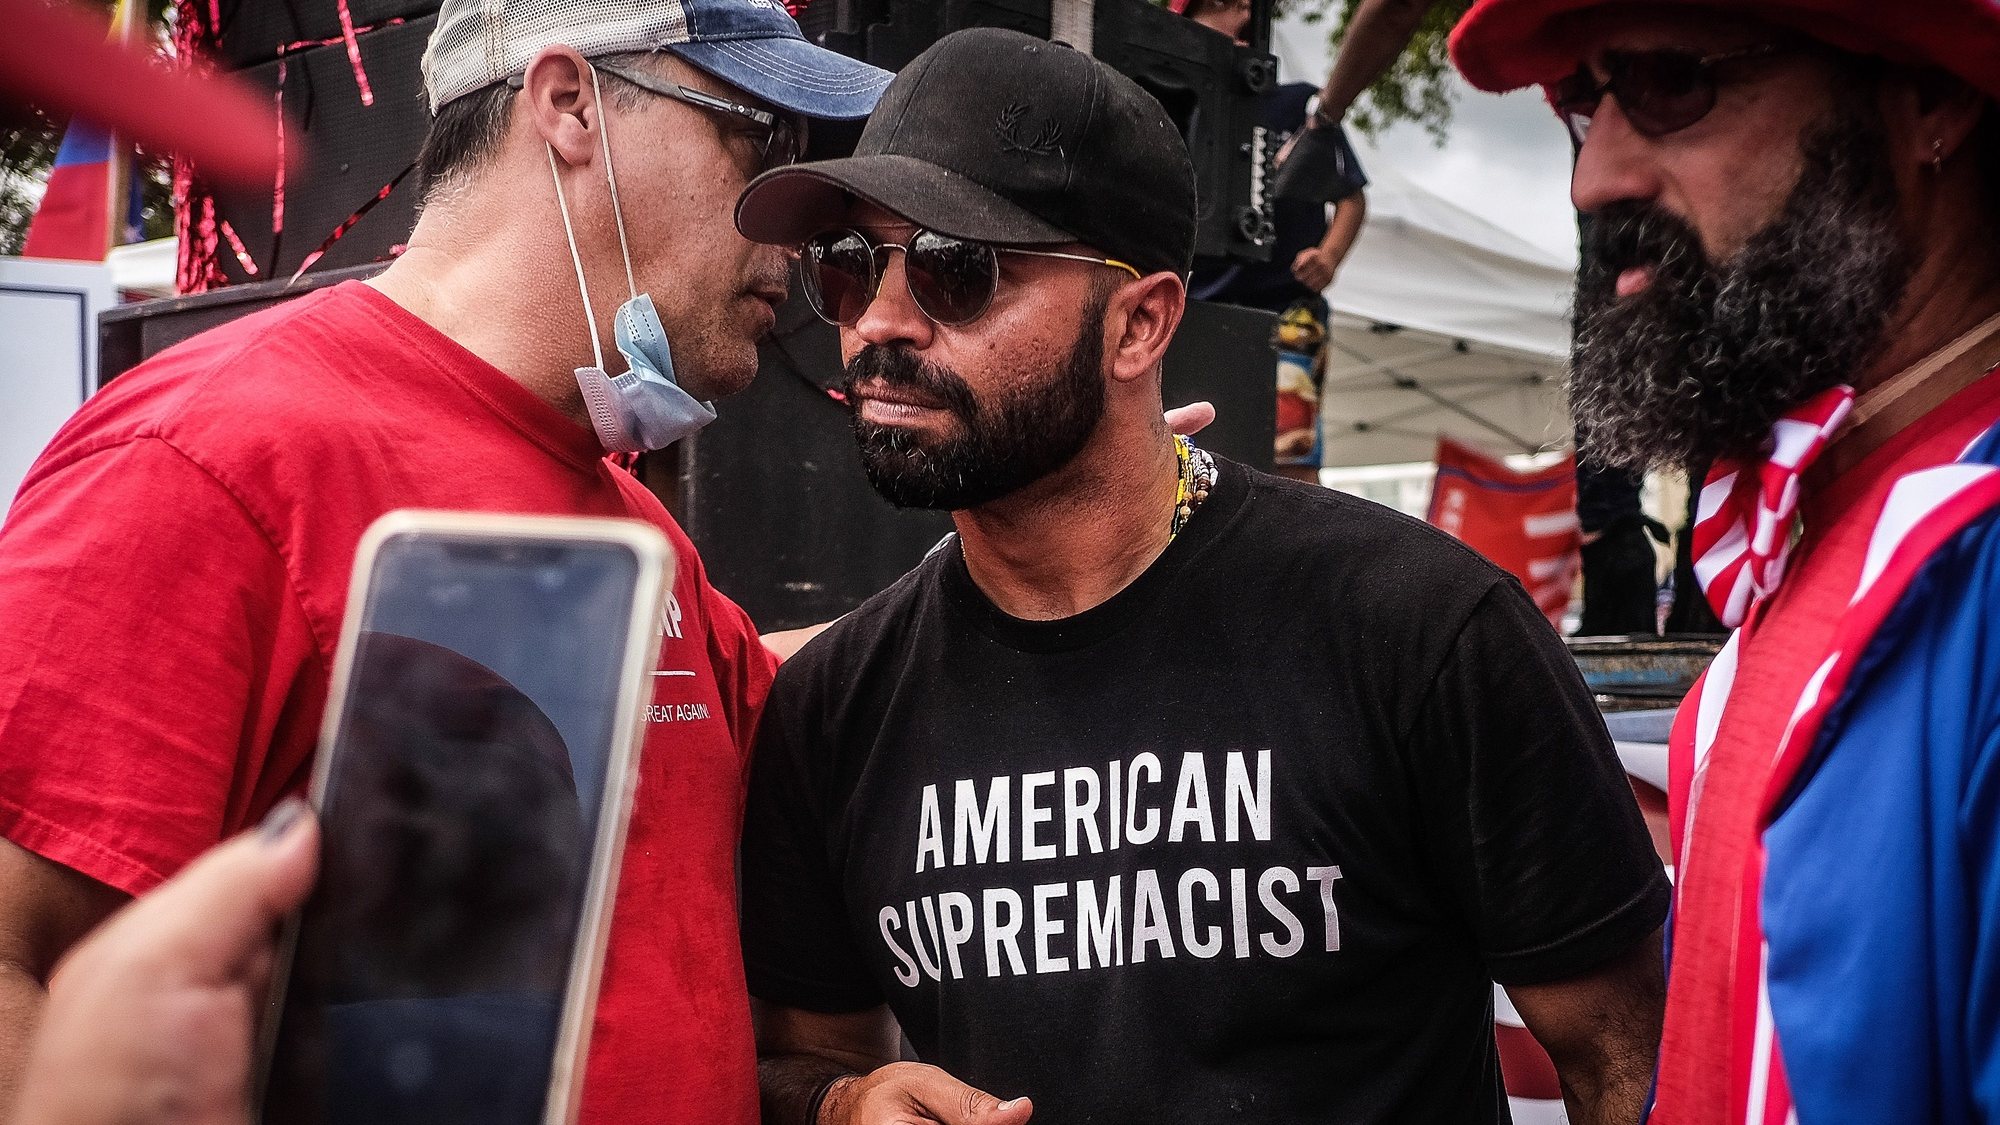 epa08985258 (FILE) - Far-right group the Proud Boys leader Enrique Tarrio (R) interacts with supporters during the &#039;Latinos for Trump&#039; demonstration, at Tamiami Park in Miami, Florida, USA, 18 October 2020 (reissued 03 February 2021). Canada has labbeled the Far-right group the Proud Boys a terrorist group, Canadian public safety minister Bill Blair announced on 03 February 2021.  EPA/MARIO CRUZ